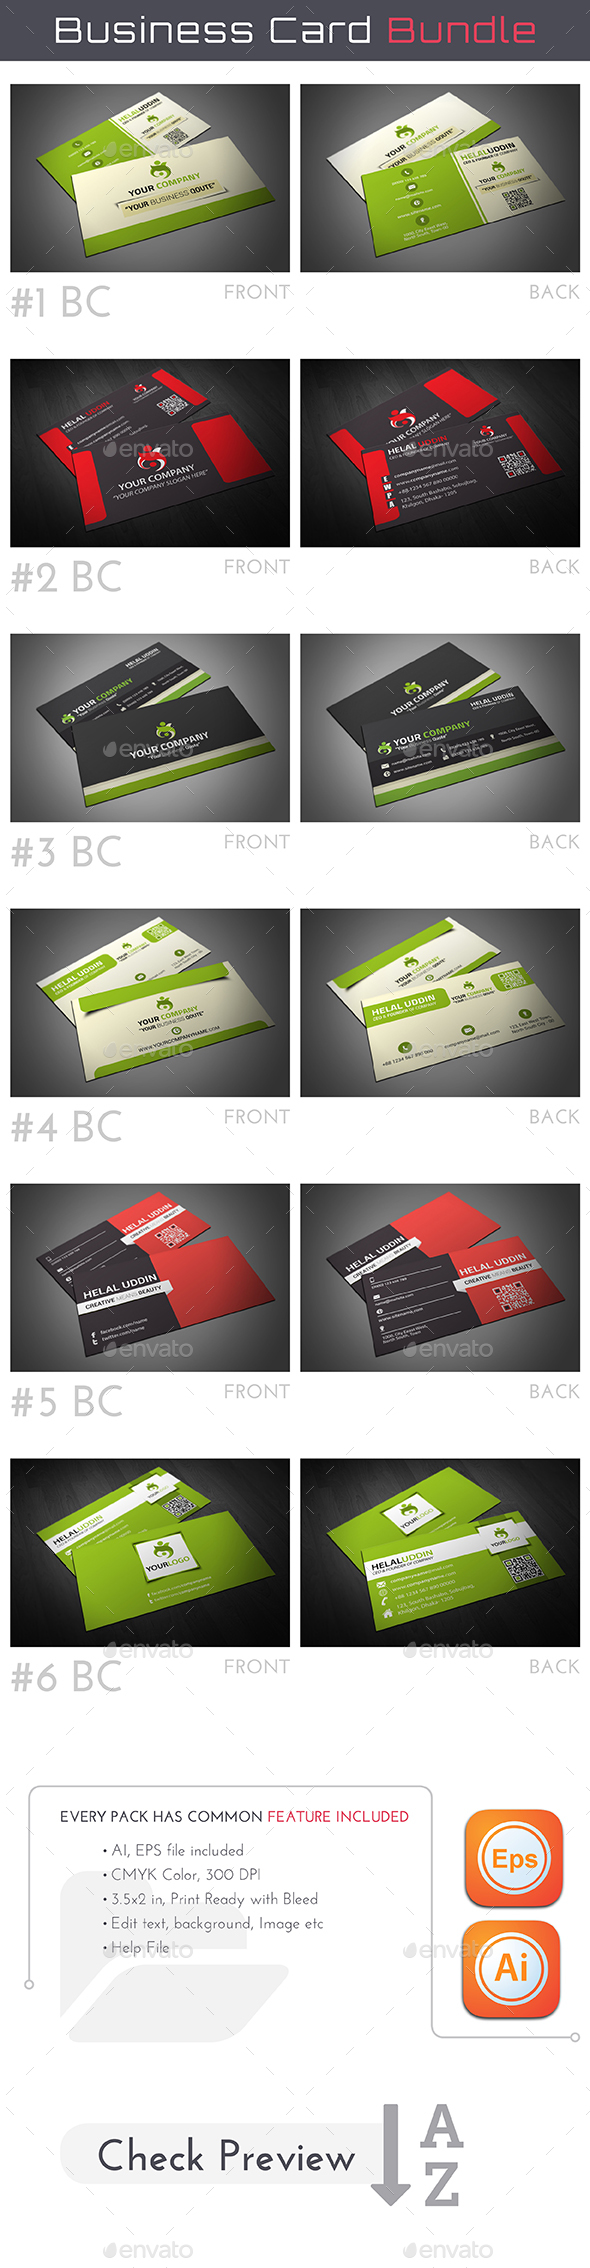 Business Card Bundle in Business Card Templates